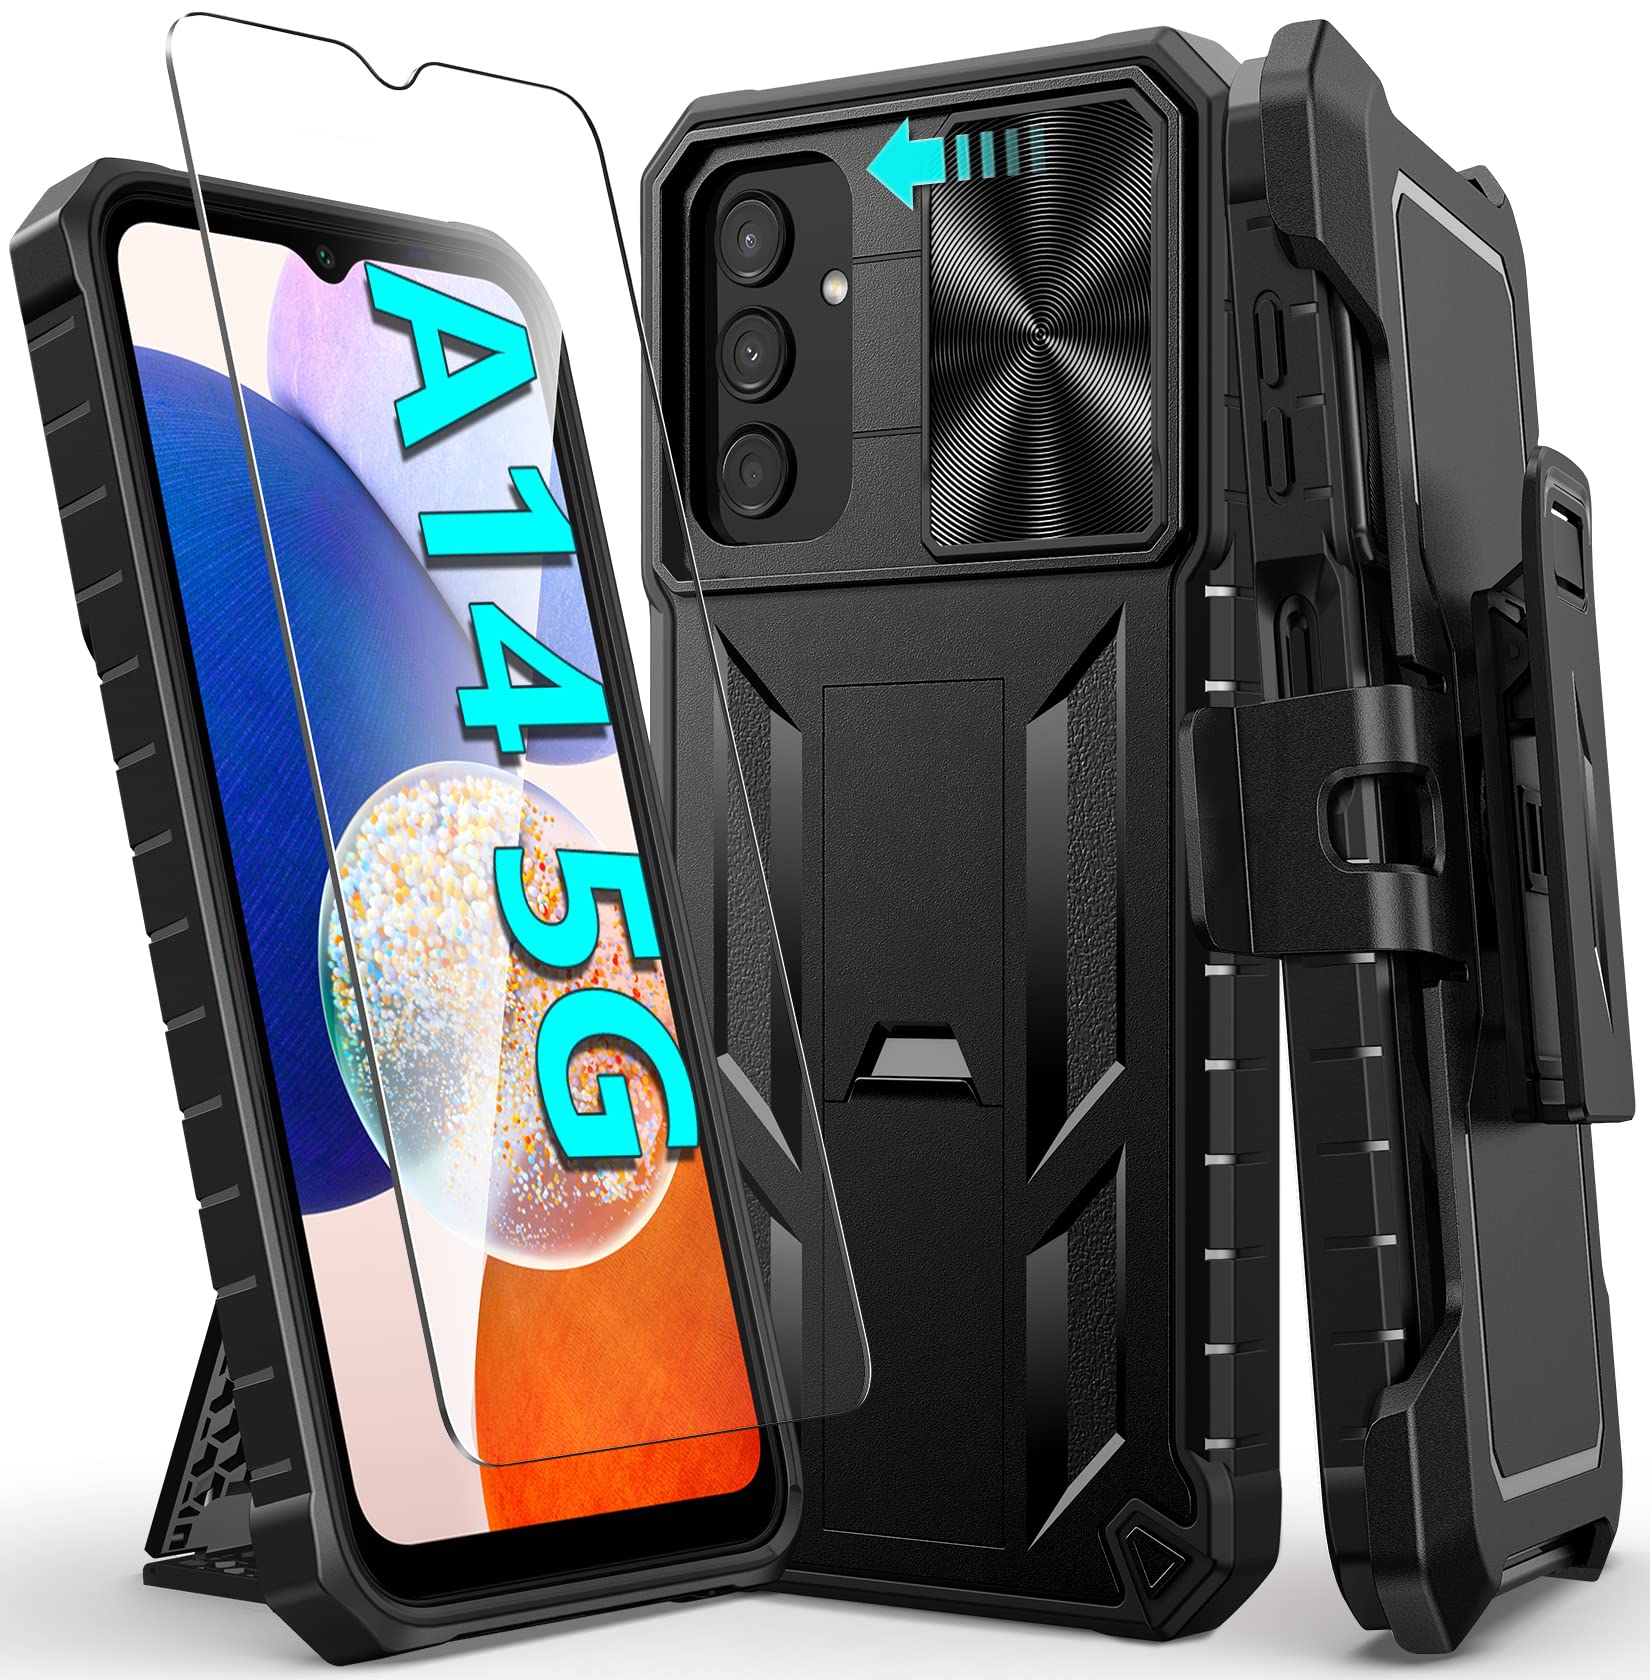 FNTCASE Case for Samsung Galaxy A14-5G: Military Grade Drop Proof Protection Rugged Protective A14 Cell Phone Cover with Belt Clip Holster Kickstand & Slide |Shockproof TPU Matte Textured Tough -Black